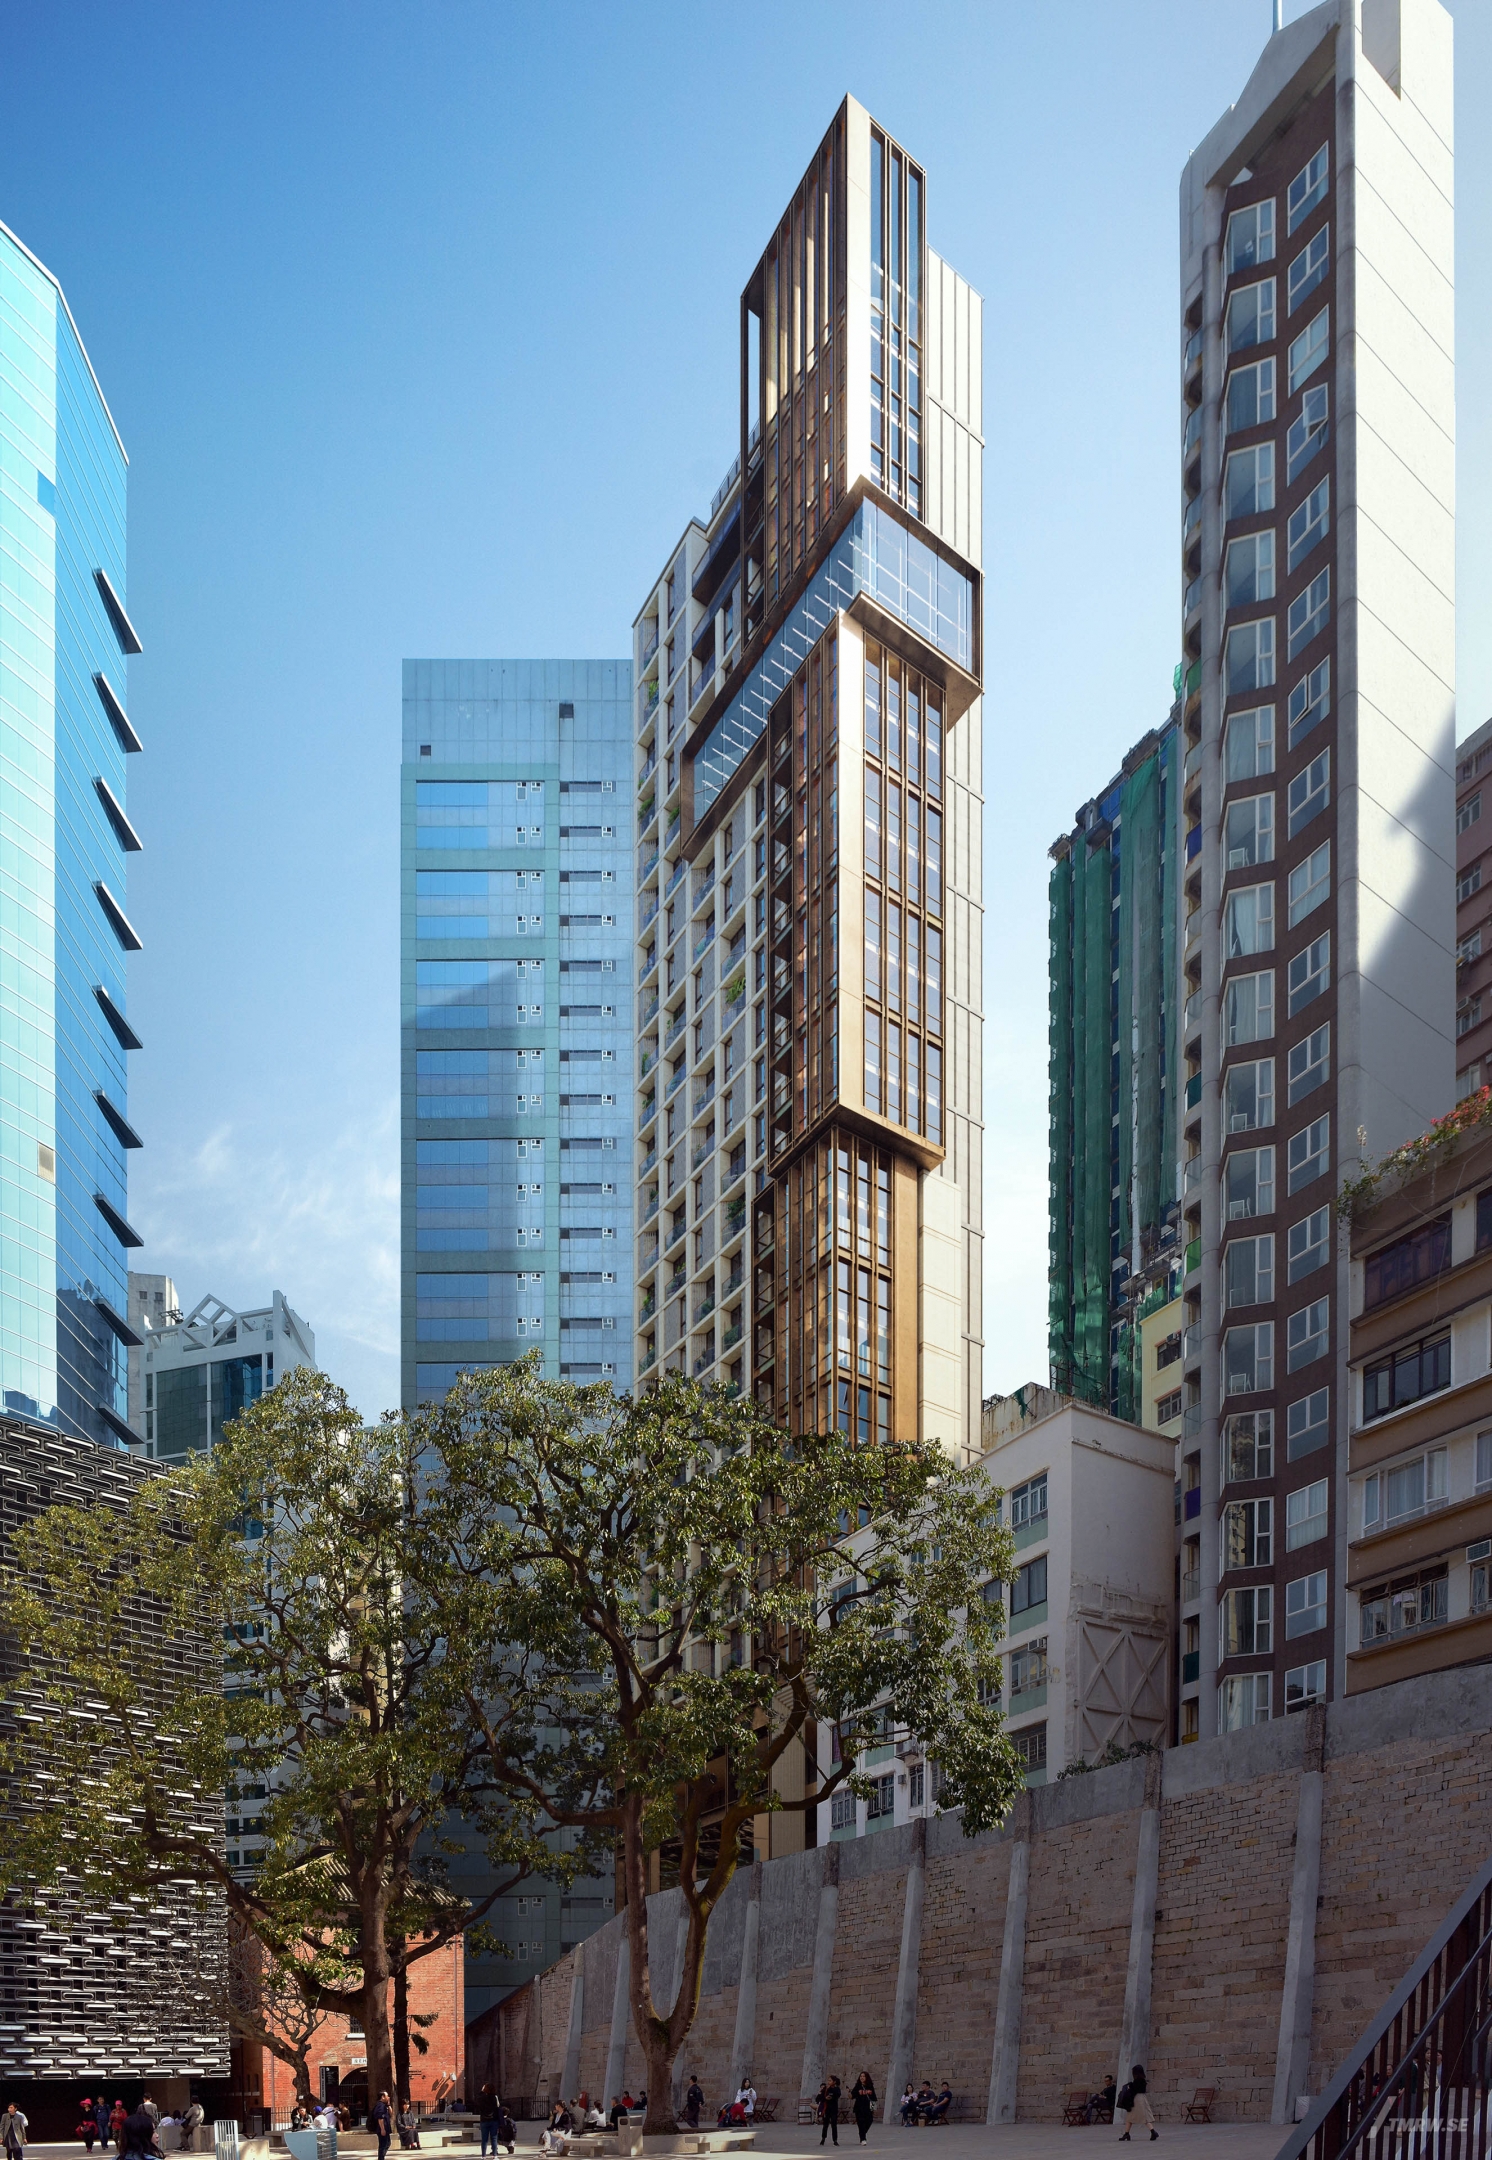 Architectural visualization of Chancery Lane for KPF, an skyscraper during day light from a street view.